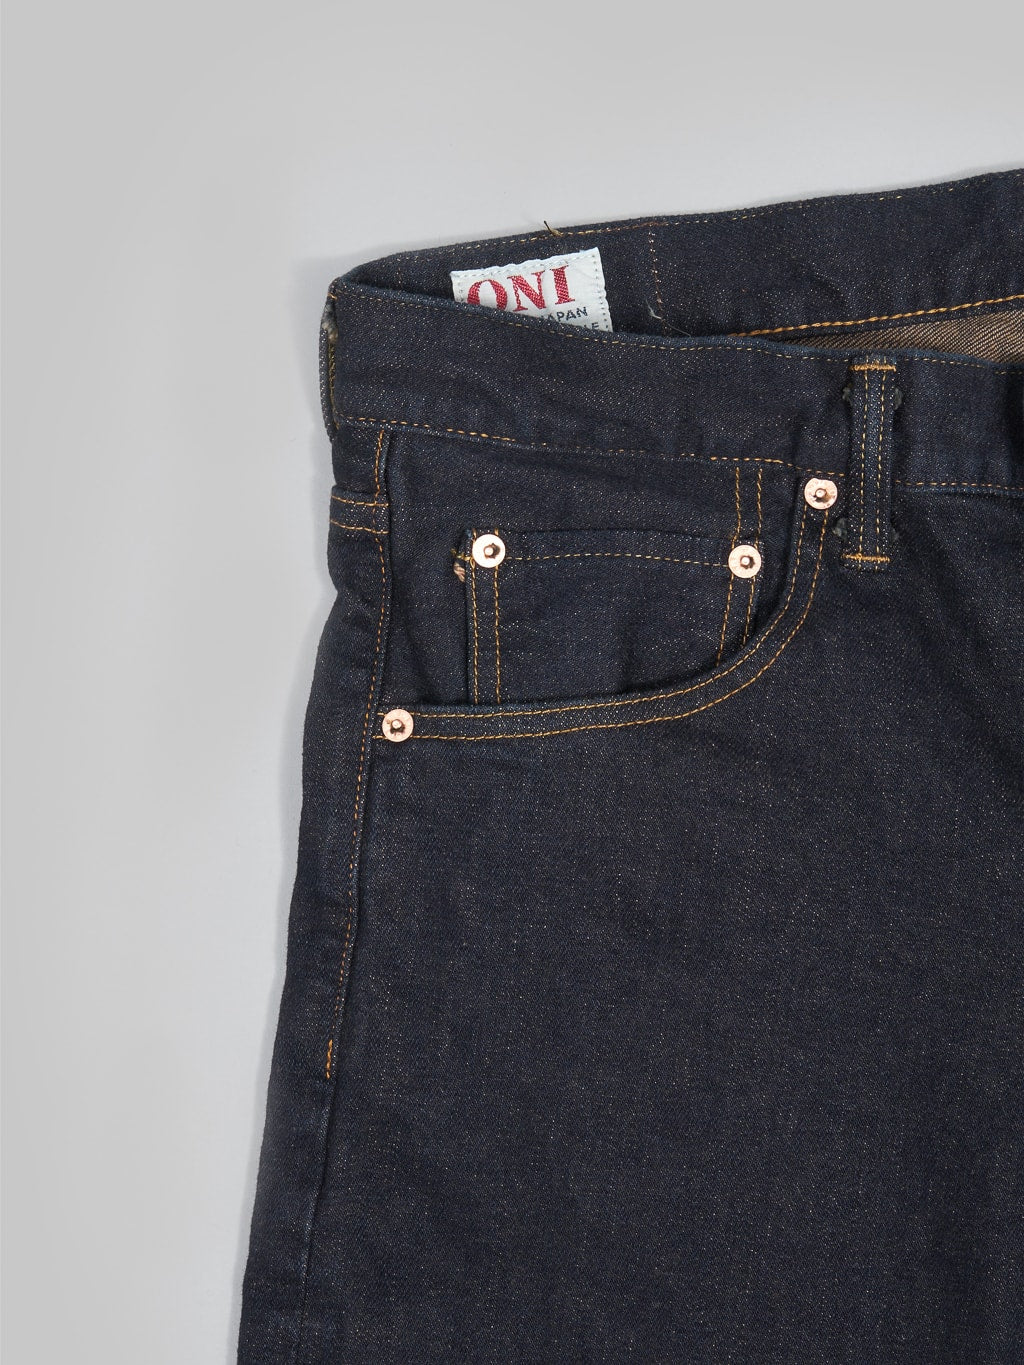 ONI Denim 122S Mocha Weft 15oz Stretch Relax Tapered Jeans coin pouch